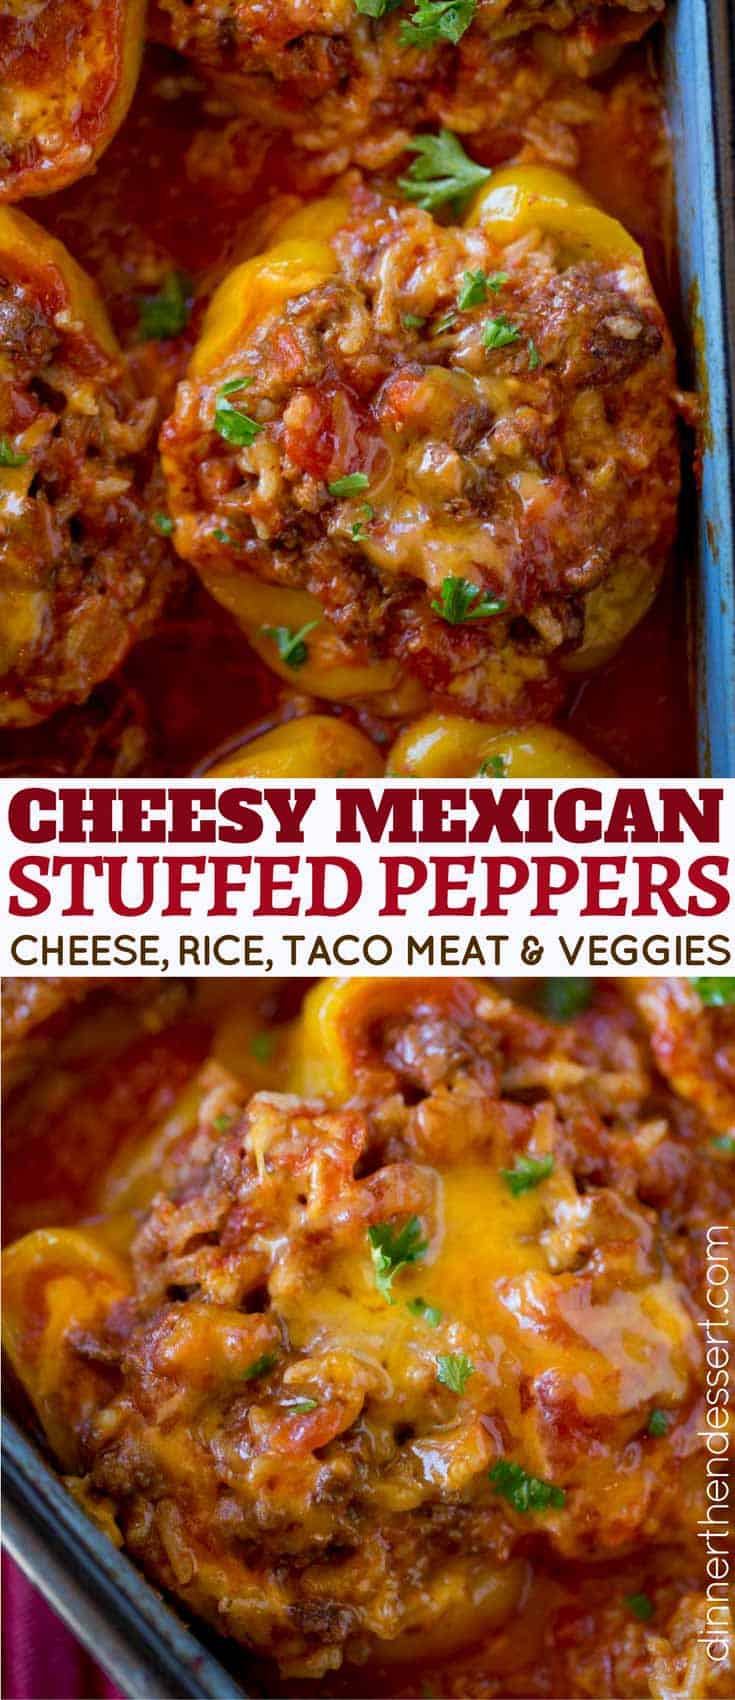 You'll love these Cheesy Taco Stuffed Peppers!